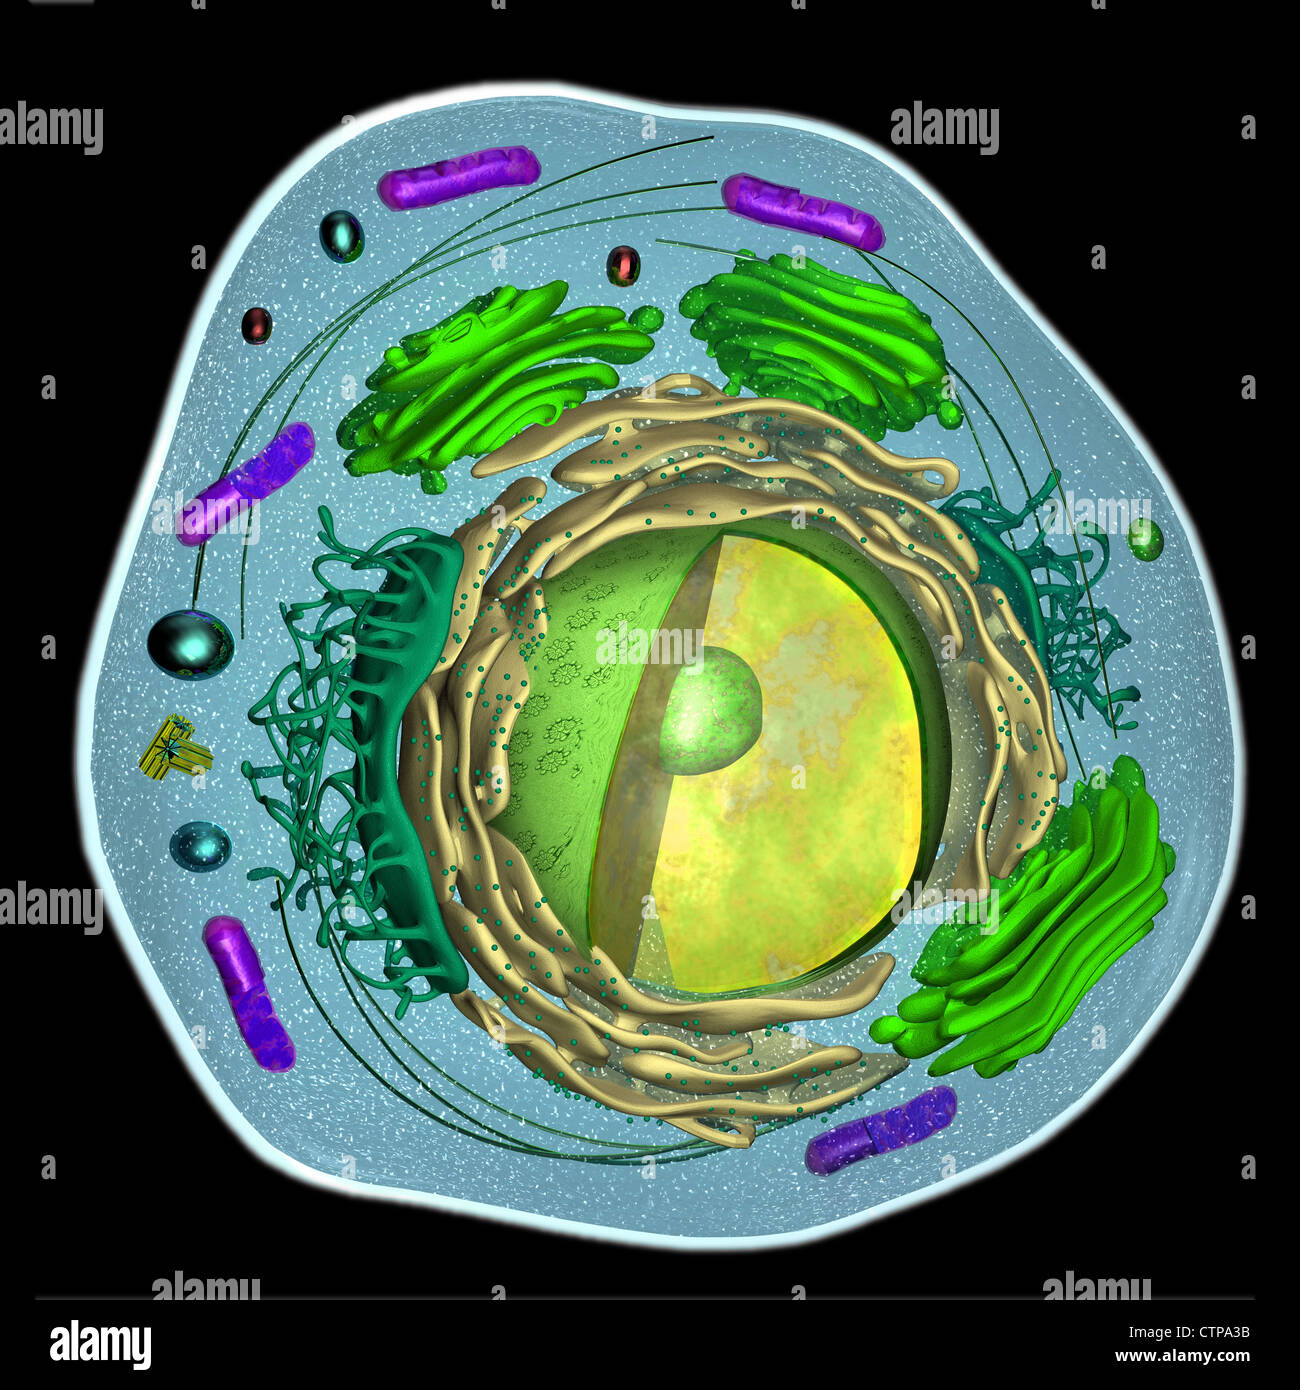 3D model of a eukaryotic cell Stock Photo